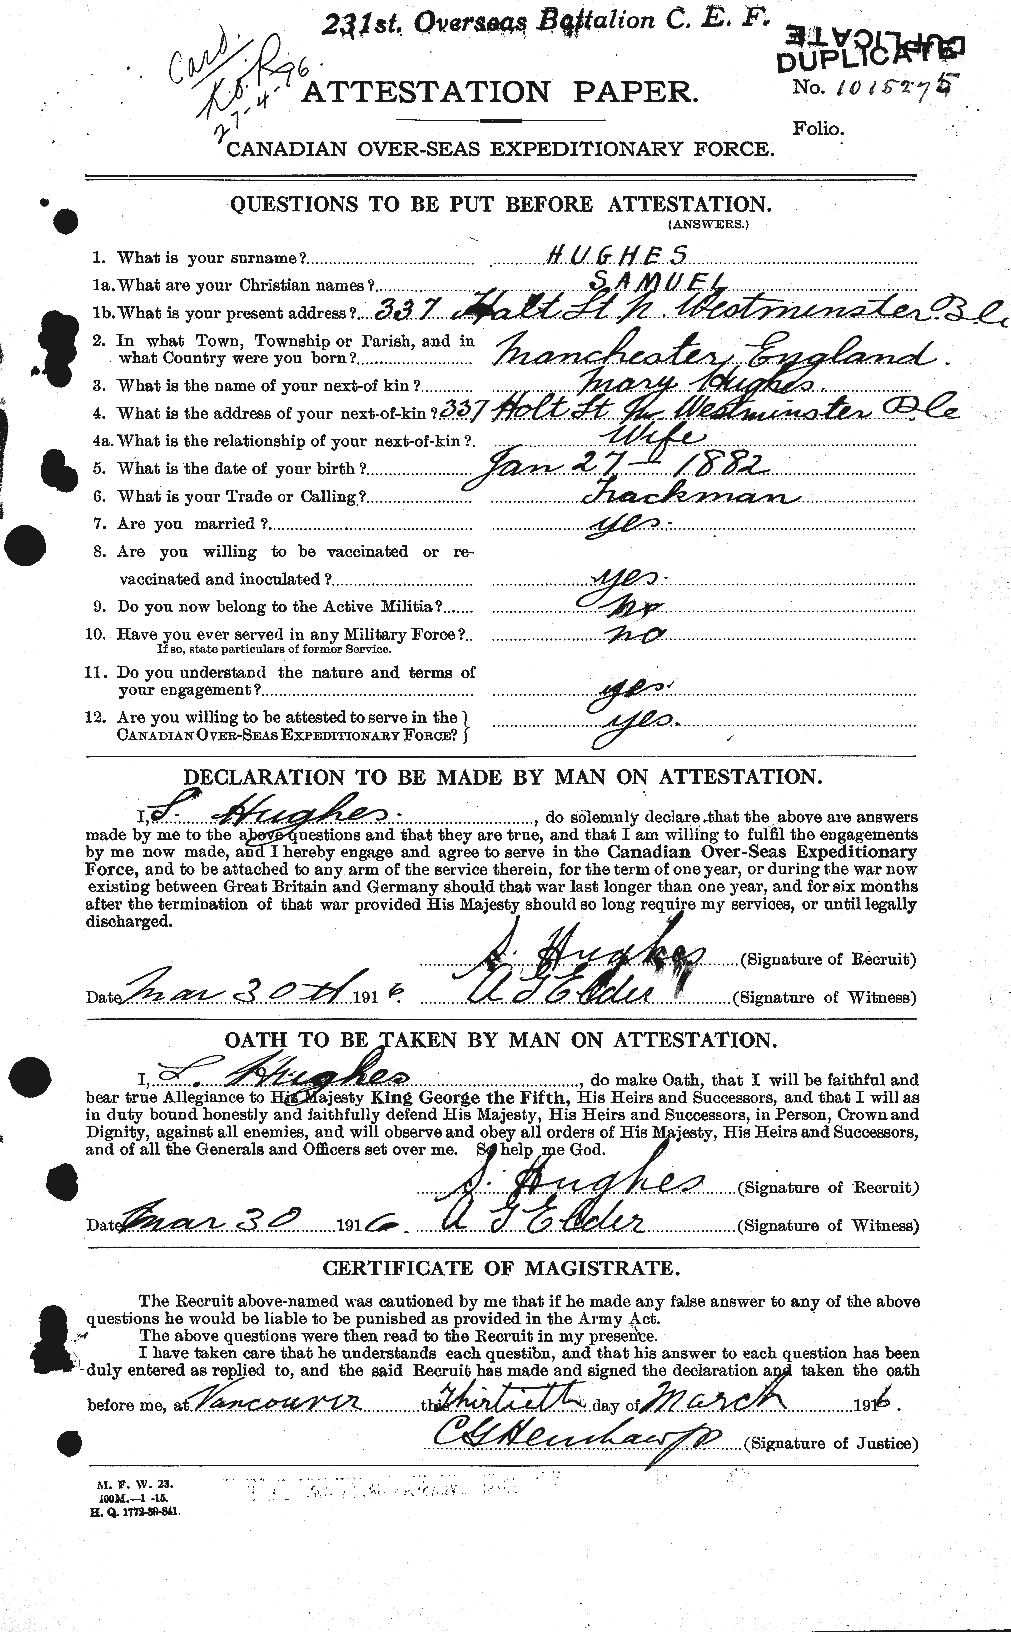 Personnel Records of the First World War - CEF 406633a